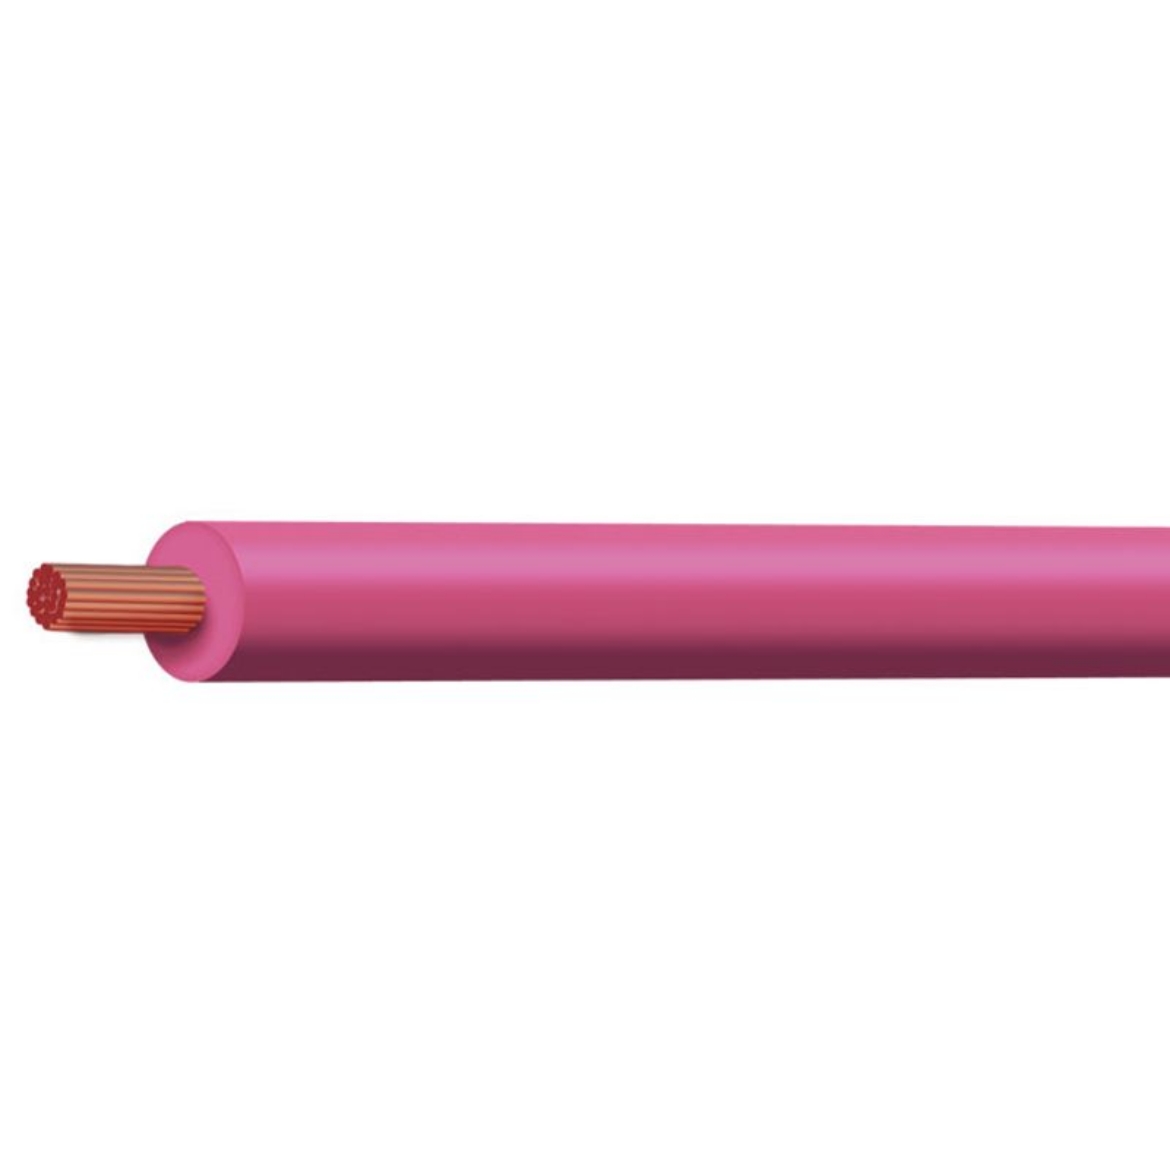 Picture of TYCAB 6MM SINGLE CORE CABLE 50A PINK - 30M ROLL